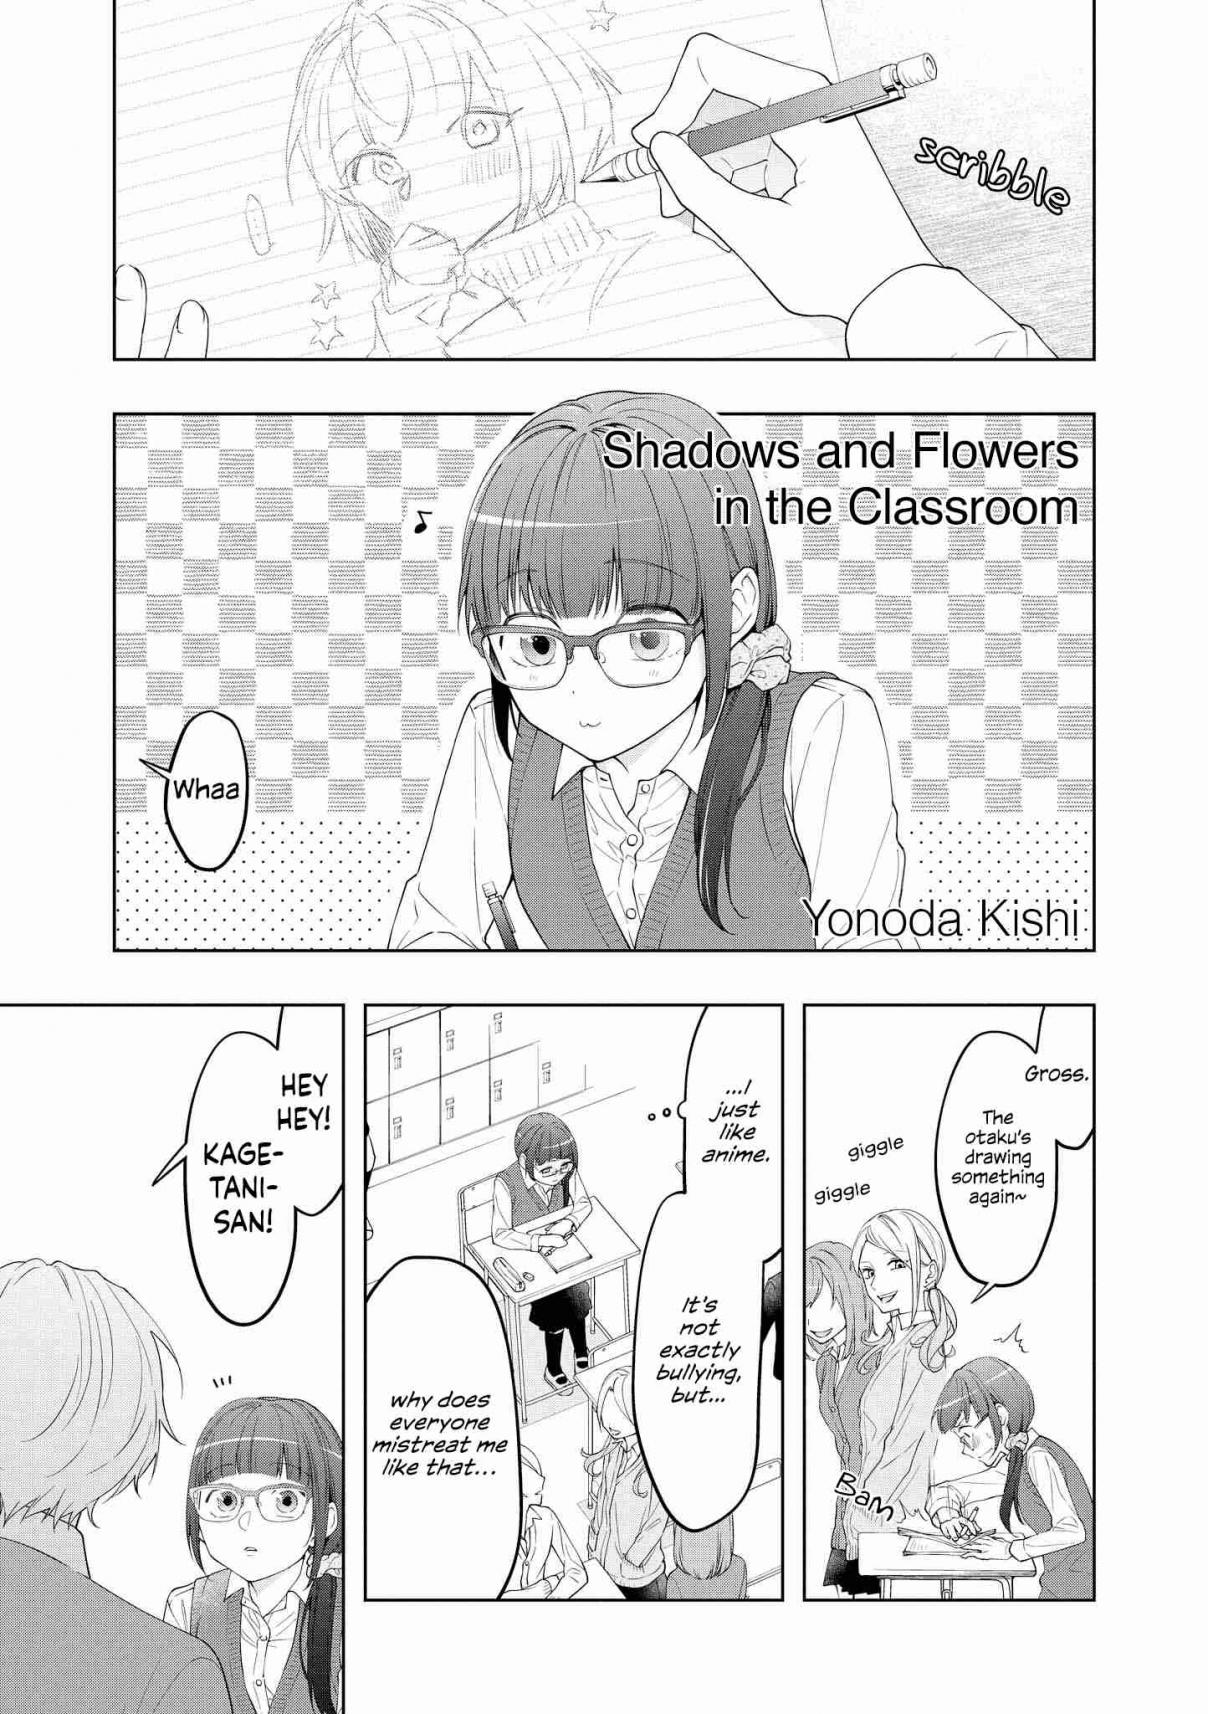 “It’s too precious and hard to read !!” 4P Short Stories Vol. 1 Ch. 24 Shadows and Flowers in the Classroom [by Yonoda Kishi]